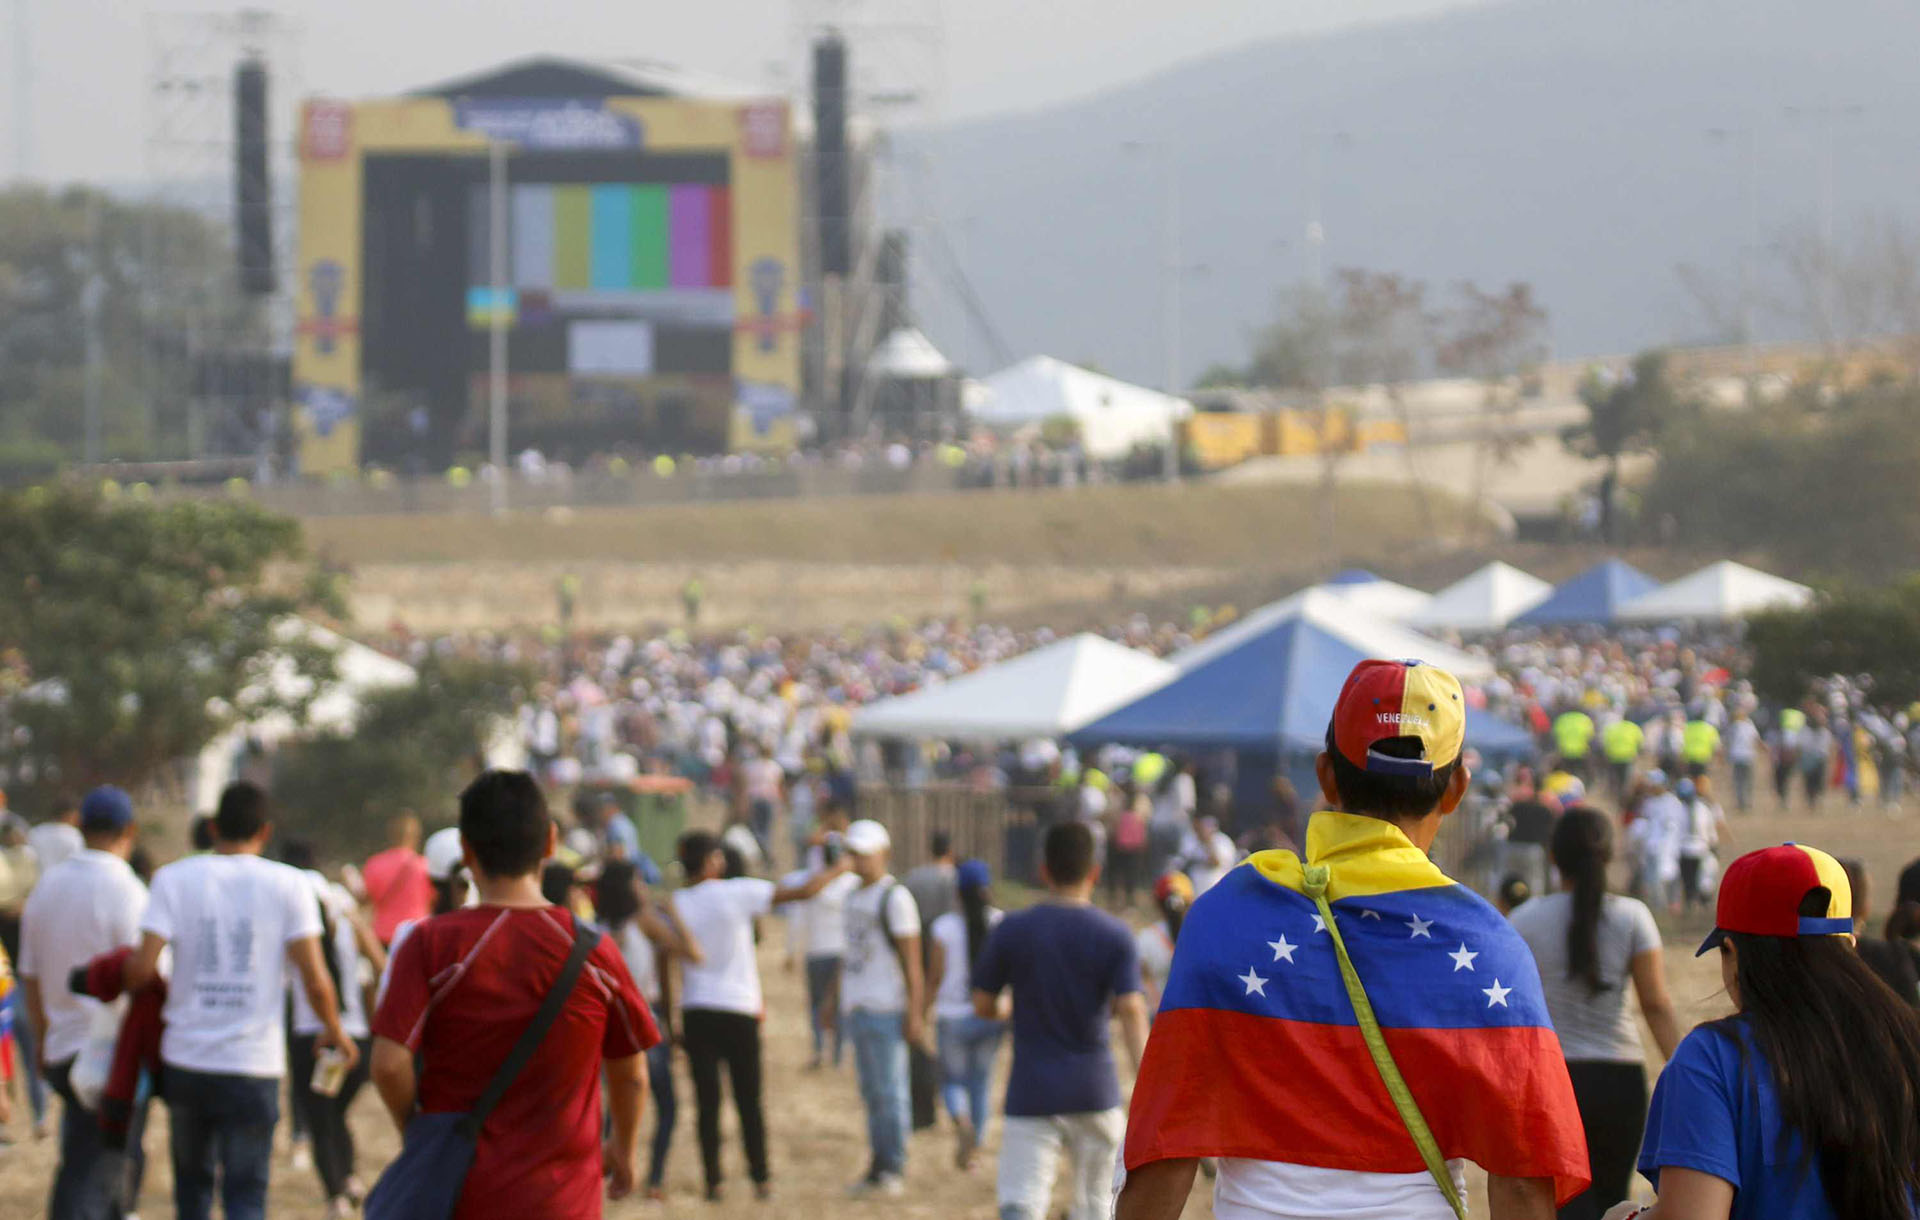 People wait for the start of "Venezuela Aid Live" concert, organized by British billionaire Richard Branson to raise money for the Venezuelan relief effort at Tienditas International Bridge in Cucuta, Colombia, on February 22, 2019 - The concert was organized by British billionaire Richard Branson to raise money for the Venezuelan relief effort. Venezuela's political tug-of-war morphs into a battle of the bands on Friday, with dueling government and opposition pop concerts ahead of a weekend showdown over the entry of badly needed food and medical aid. (Photo by SCHNEYDER MENDOZA / AFP)